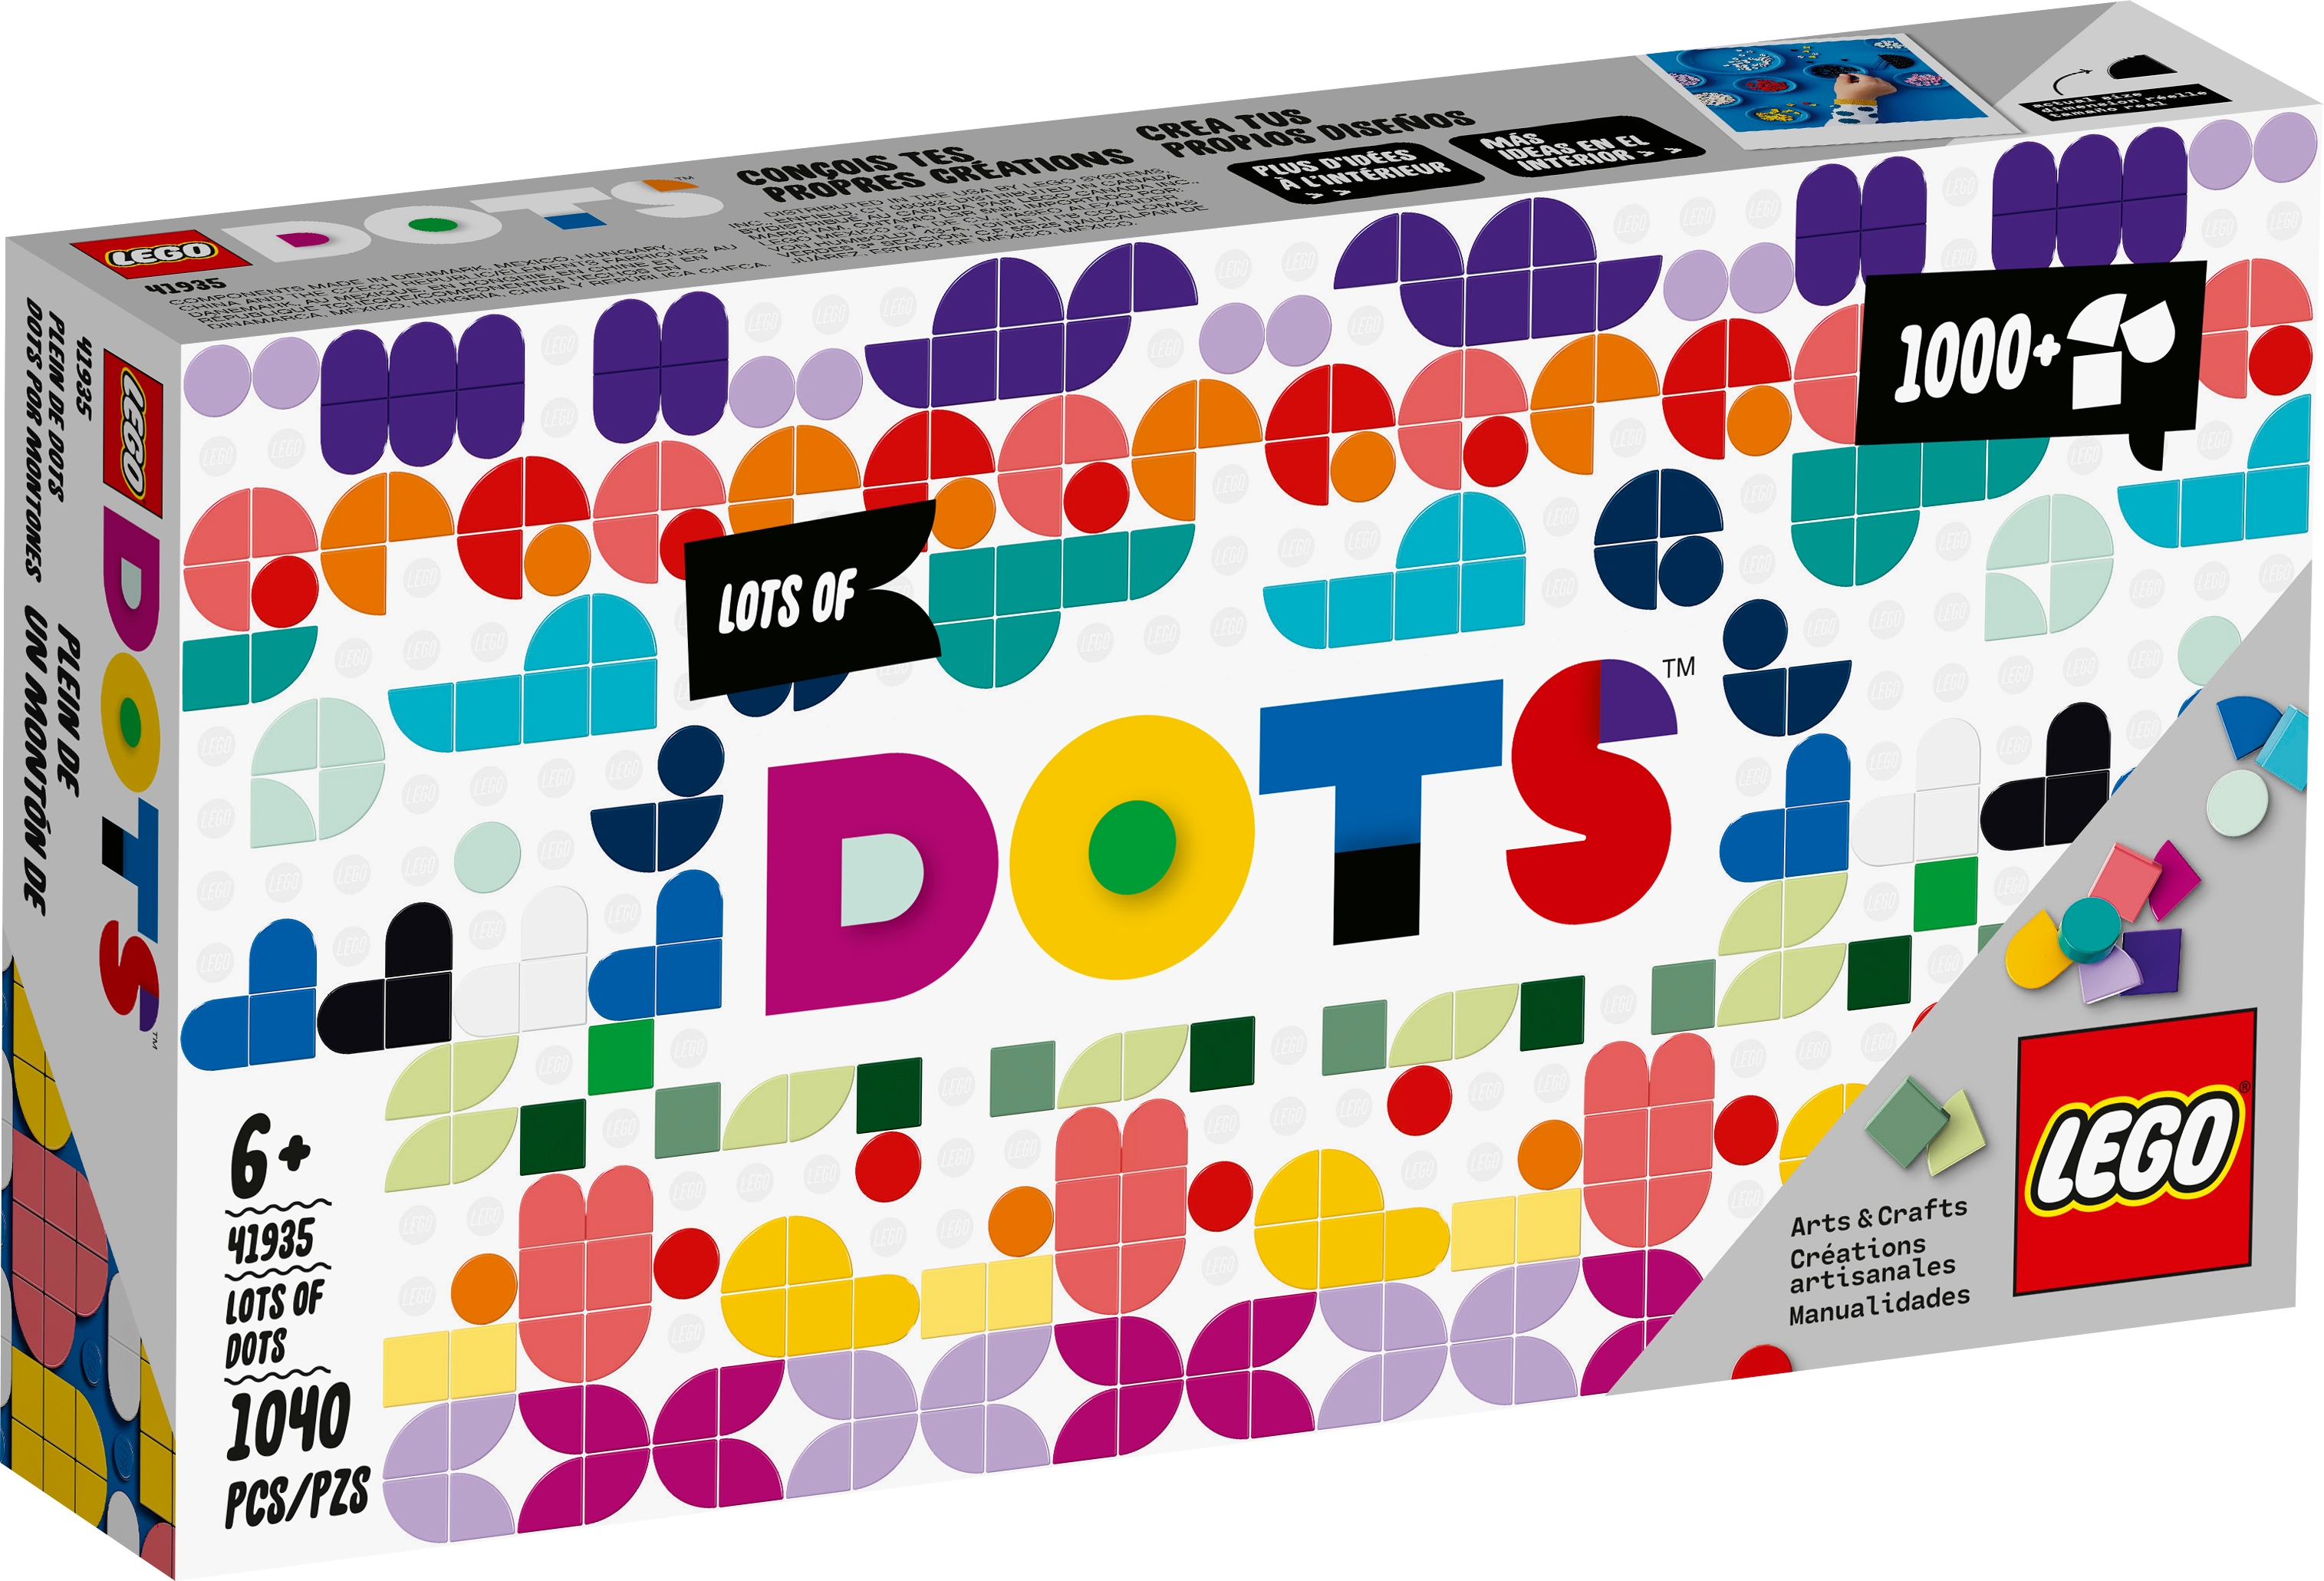 Lots of DOTS 41935 | DOTS | Buy online at the Official LEGO® Shop US